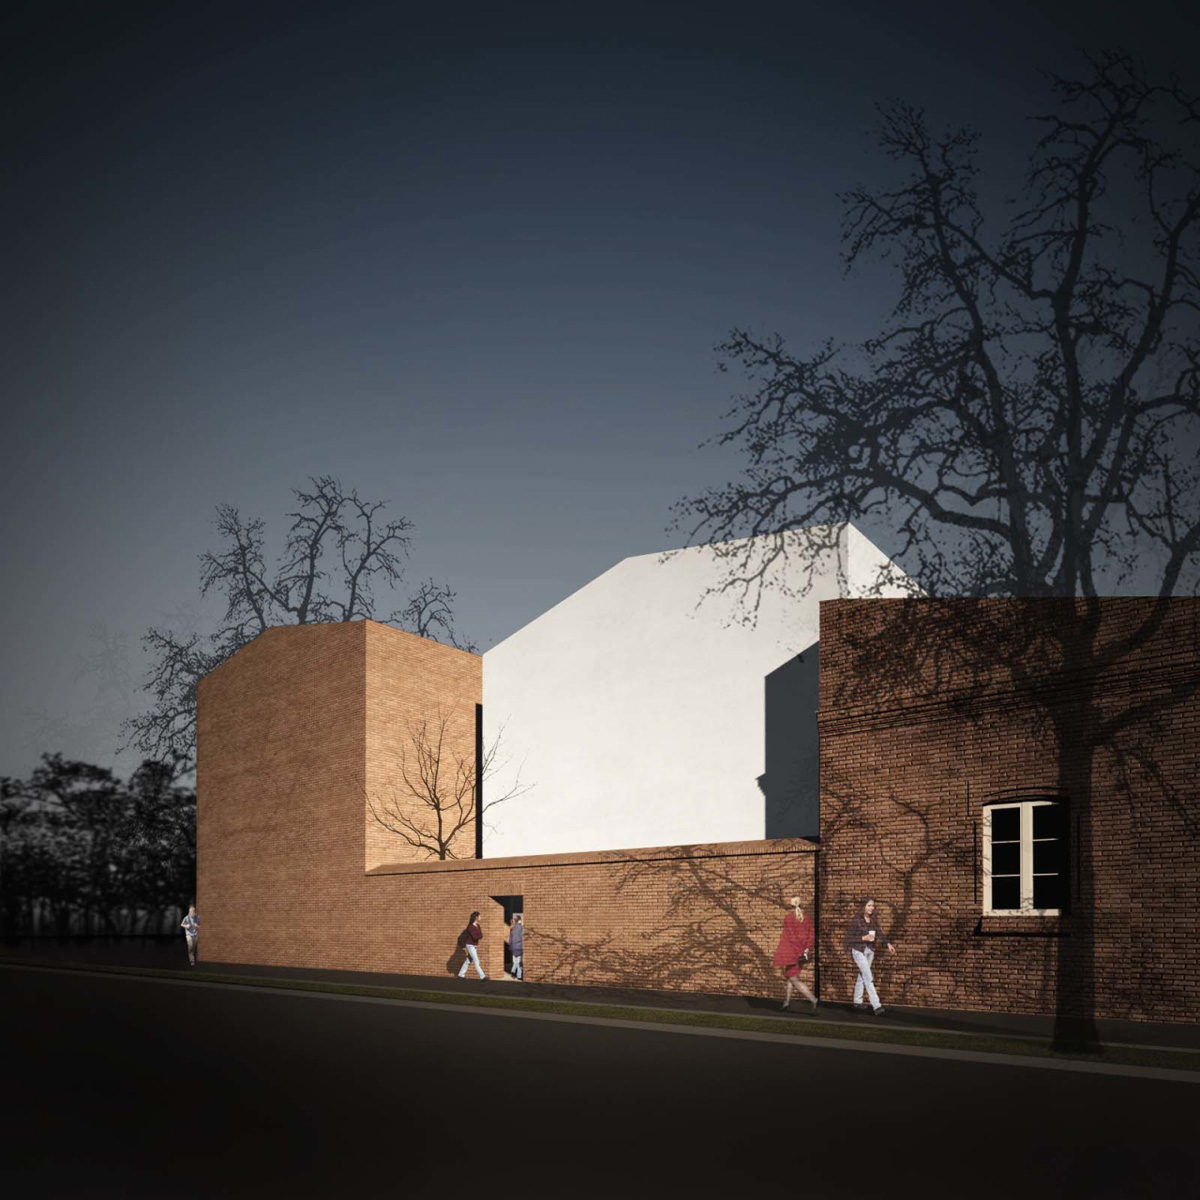 ch+ fine arts academy in warsaw – competition (mention)